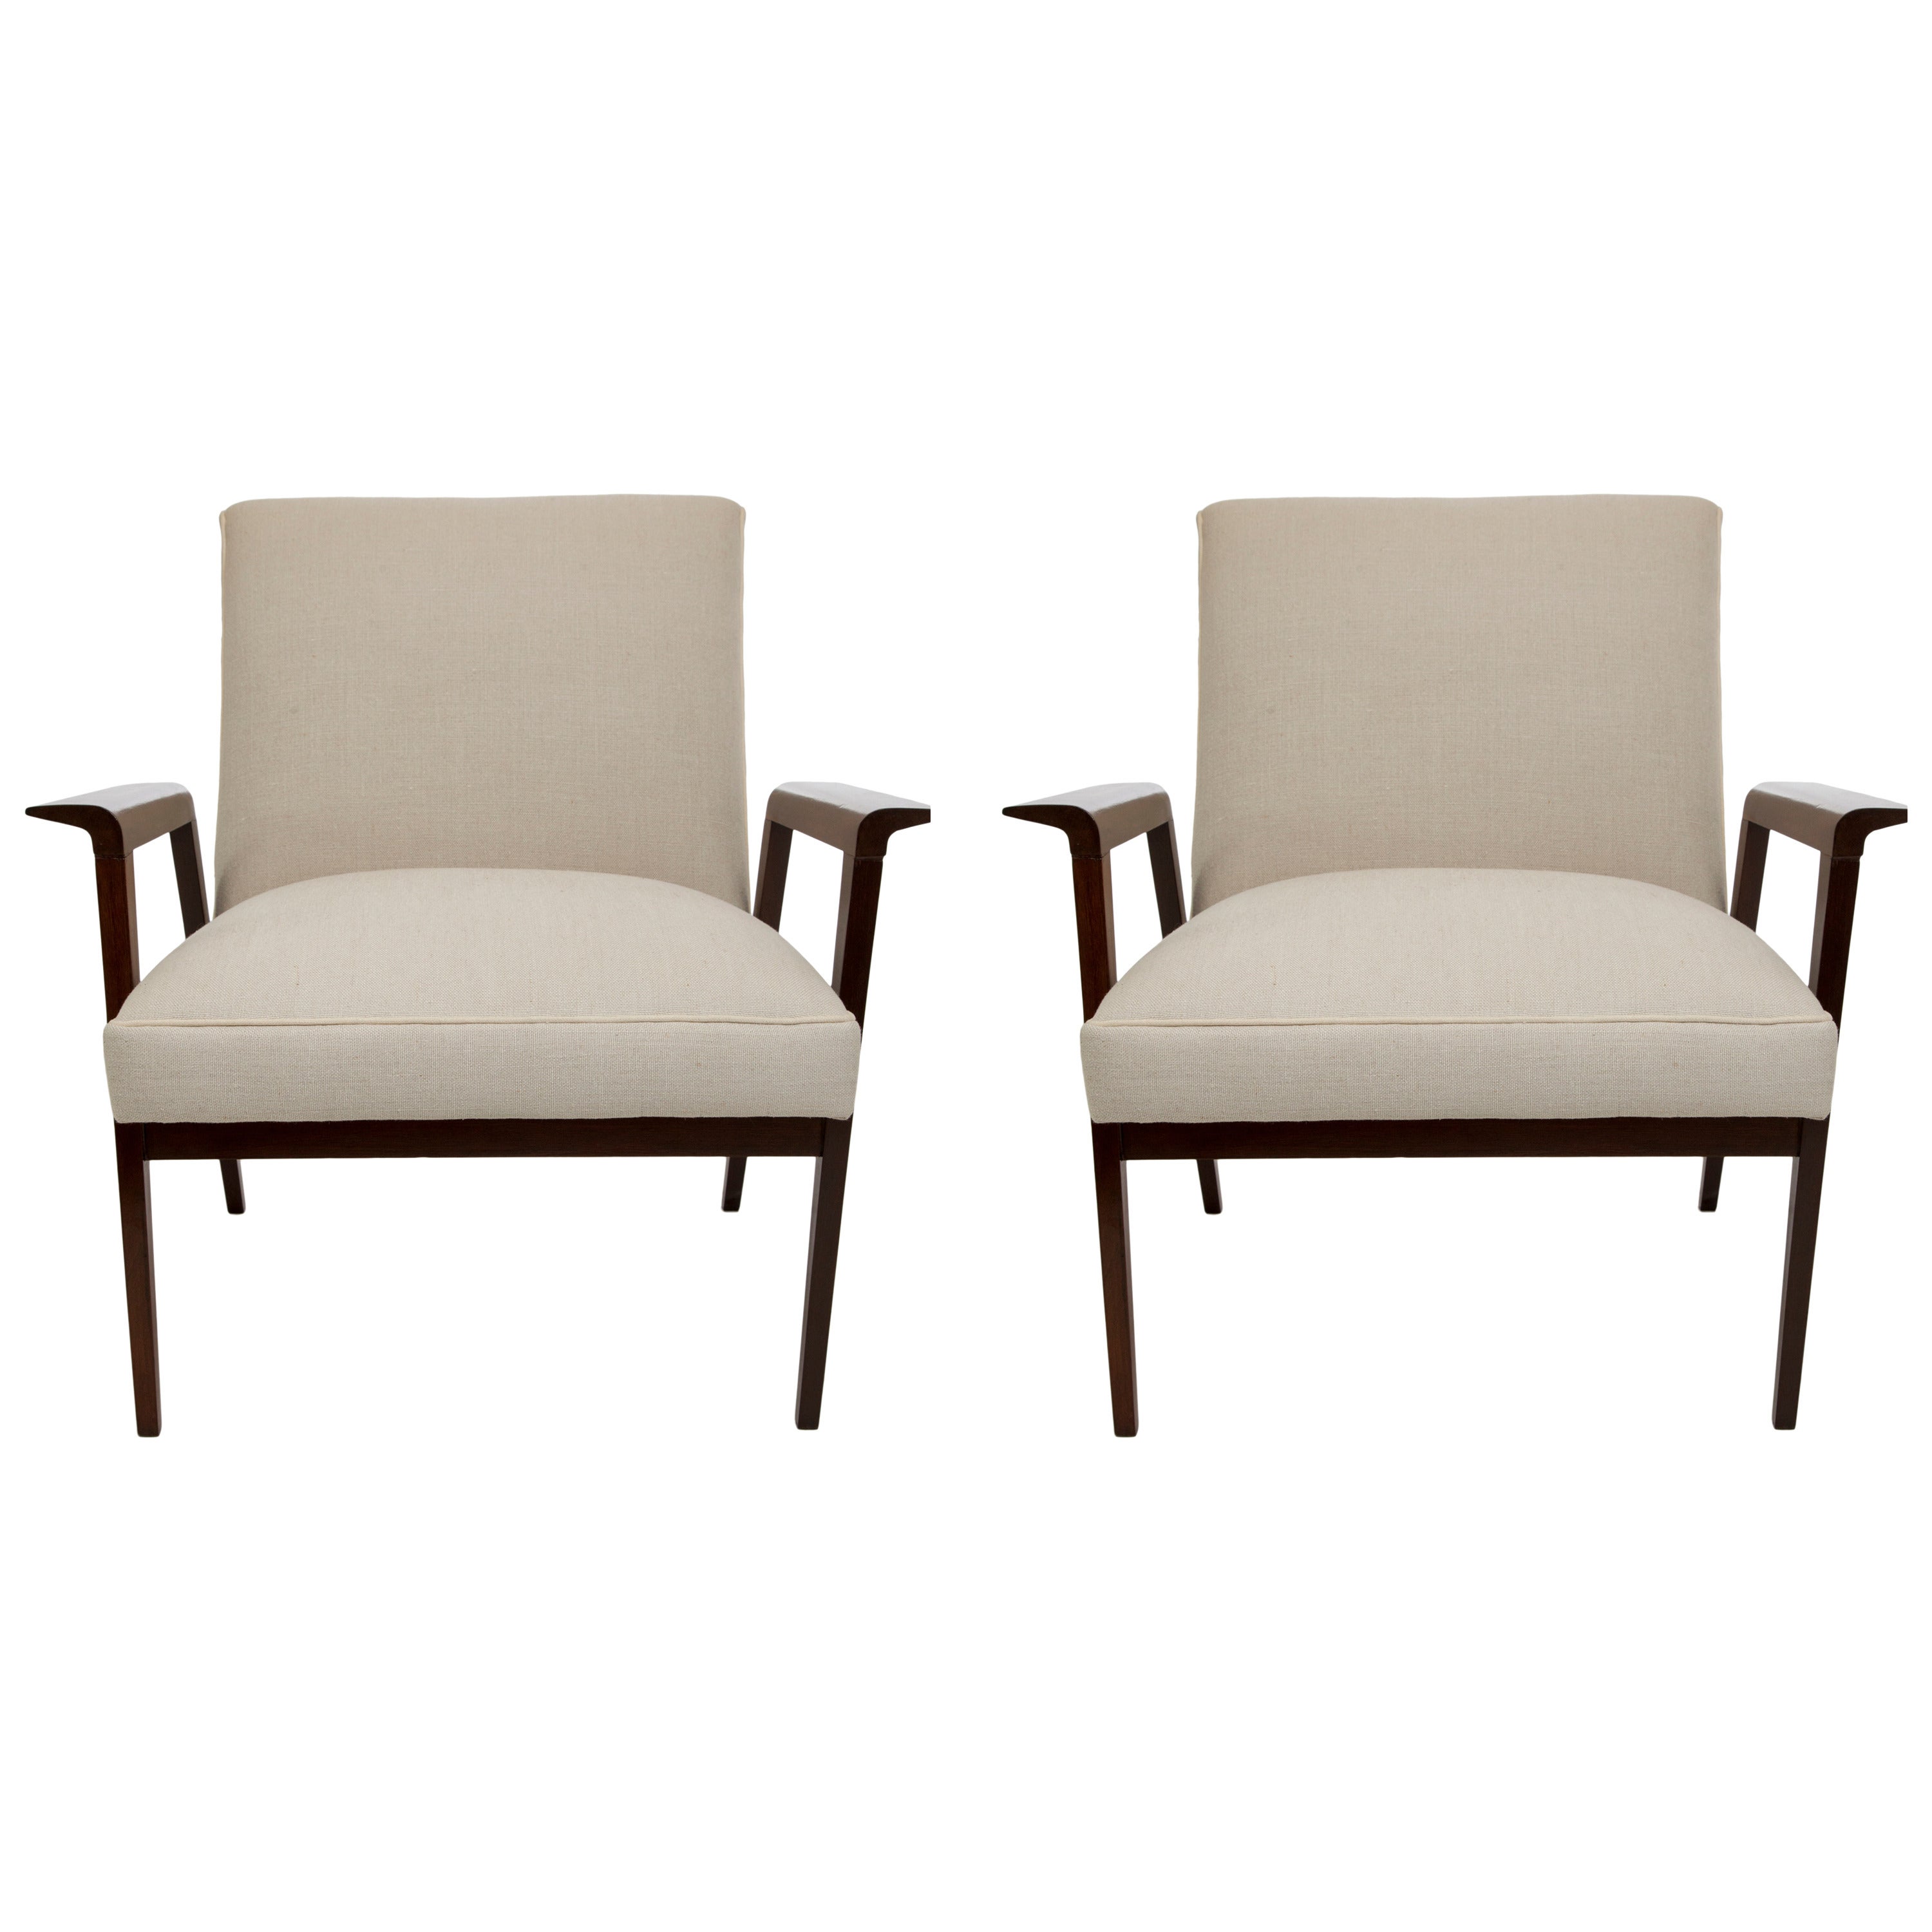 Pair of Brazilian Imbuia Wood Armchairs with Beige Linen by Gelli